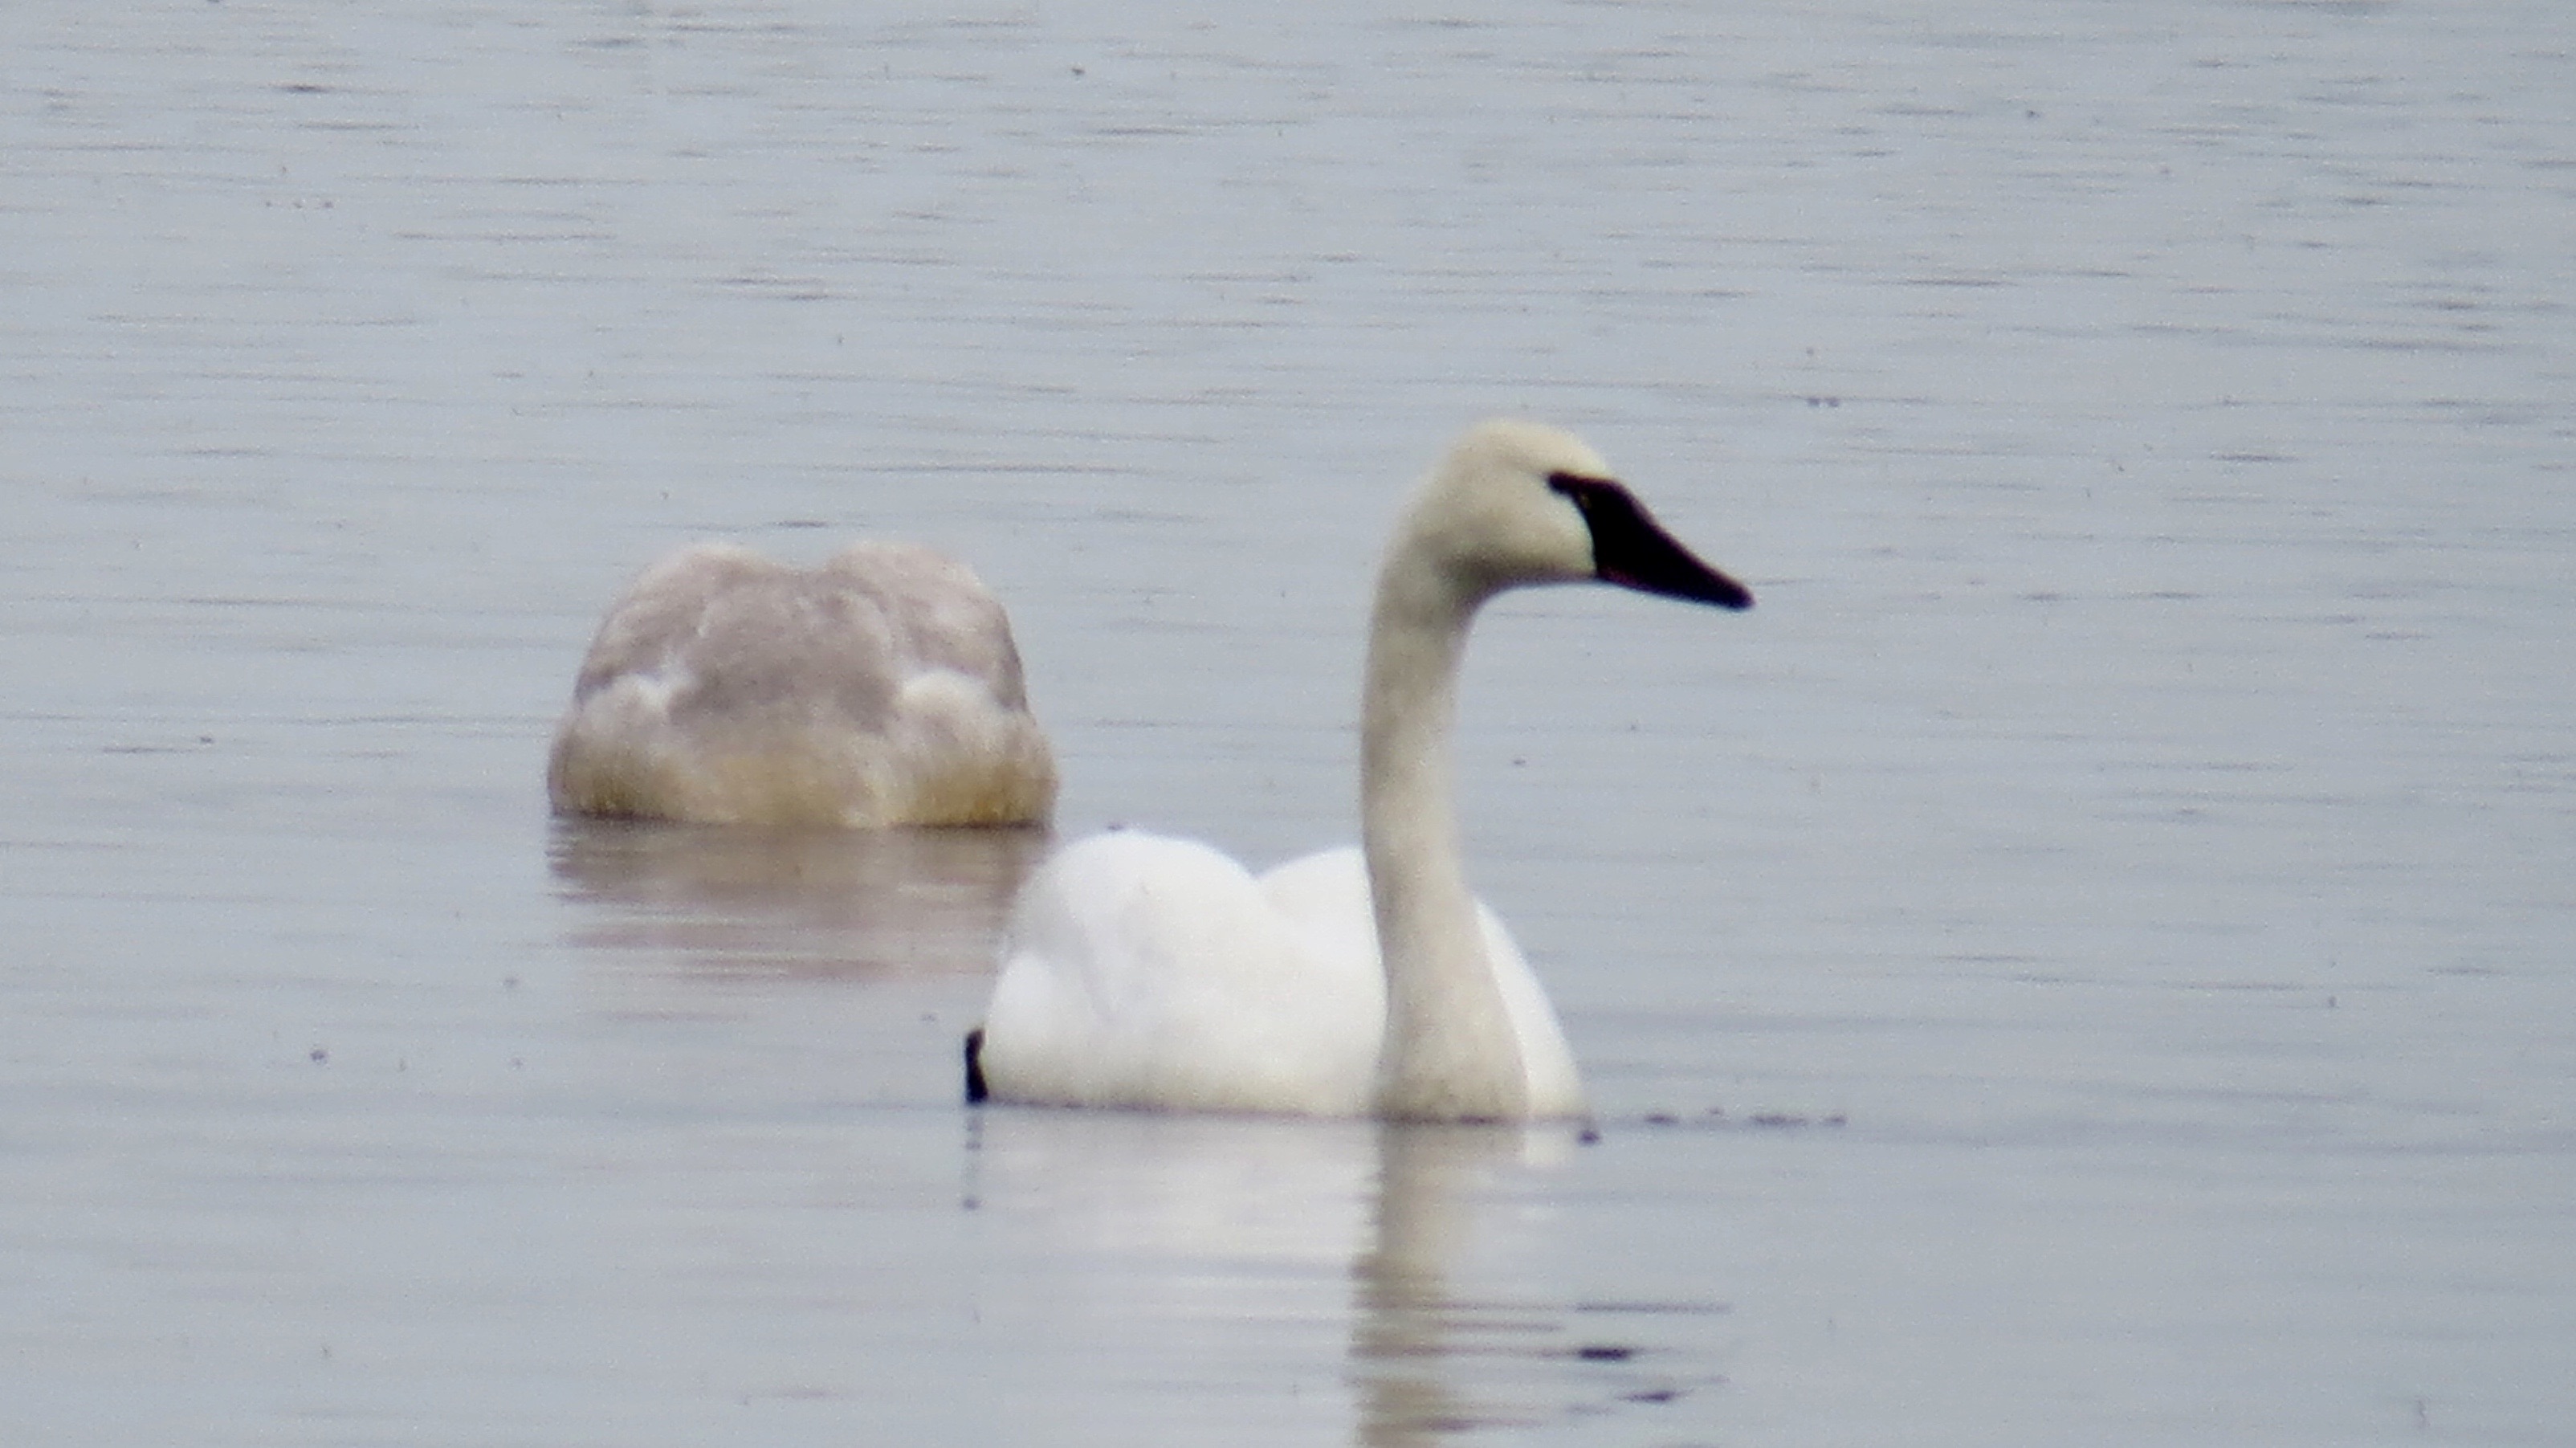 A Trumpeter Swan. The "rock" in the background is a juvenile swan eating. 